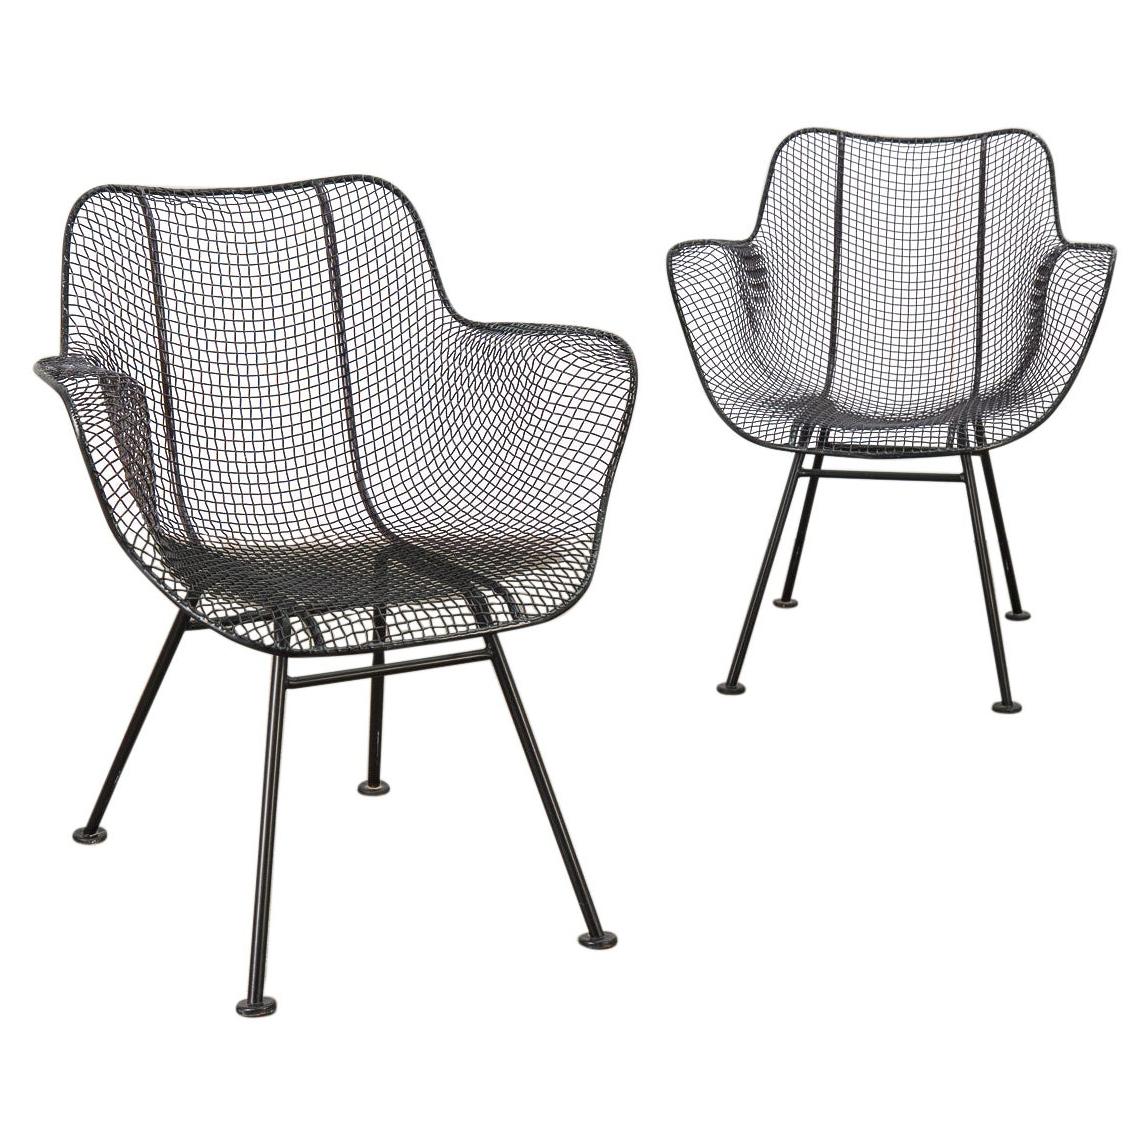 Pair of Sculptura Patio Chairs by Russell Woodard